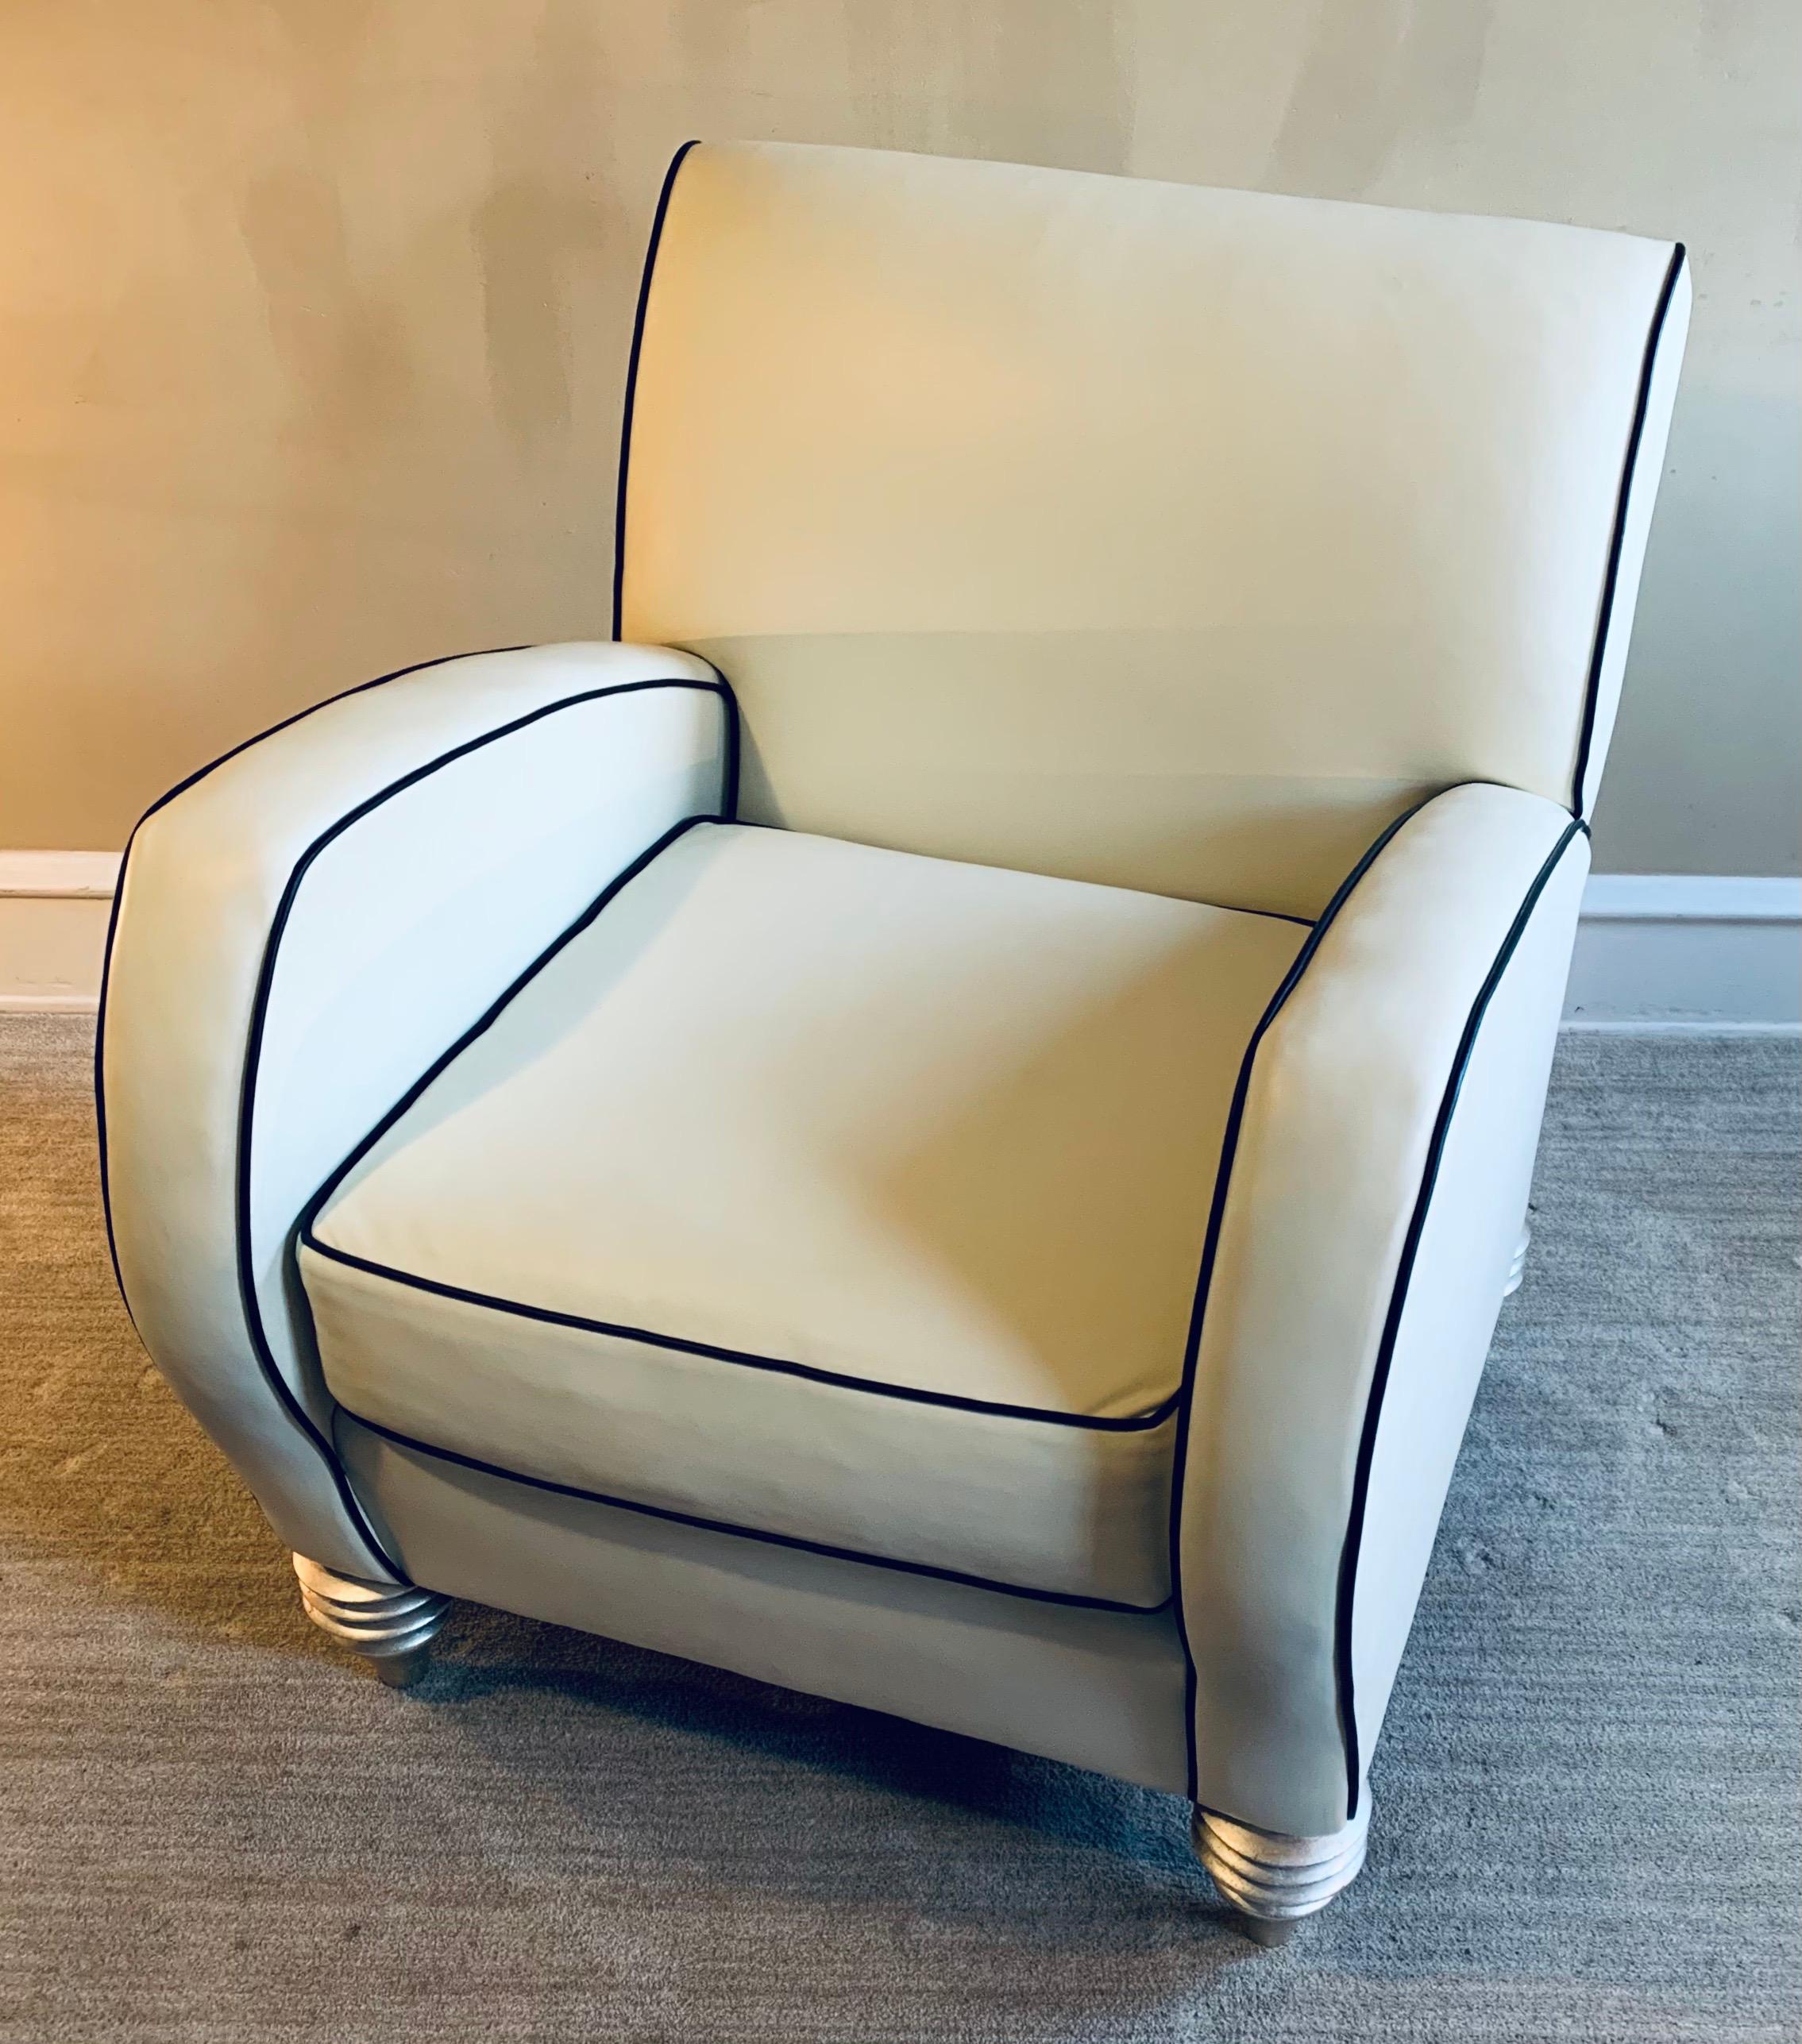 Art Deco Style Cream Leather Club Chair by Larry Laslo for Directional (Art déco)